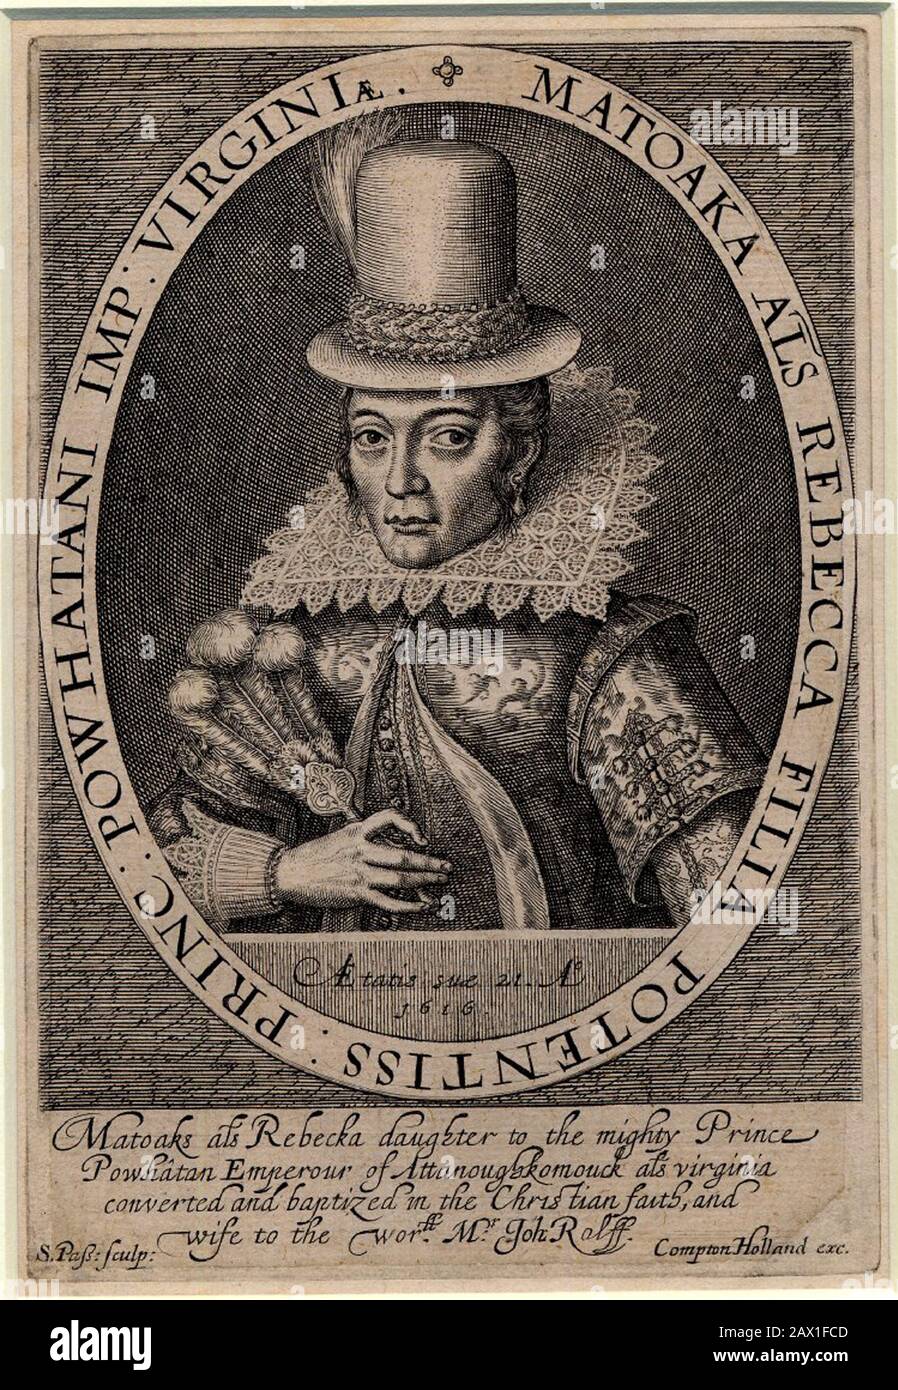 1616 , GREAT BRITAIN : Pocahontas ( Virginia, 1595 ca – Gravesend, 21 march 1617 ) as  Mrs. John Rolfe , from a portrait painting done in London , England , 1616 by engraver artist Simon Van de Passe ( ca. 1595 - 1647 ).  Pocahontas (born Matoaka, and later known as Rebecca Rolfe, c. 1595 -March 1617) was a Virginia Indian .In an historical anecdote, she is said to have saved the life of an Indian captive, Englishman John Smith, in 1607 by placing her head upon his own when her father raised his war club to execute him .-  POCAHONTAS - Princess Powhatani - Epopea del Selvaggio WEST - NATIVE AM Stock Photo